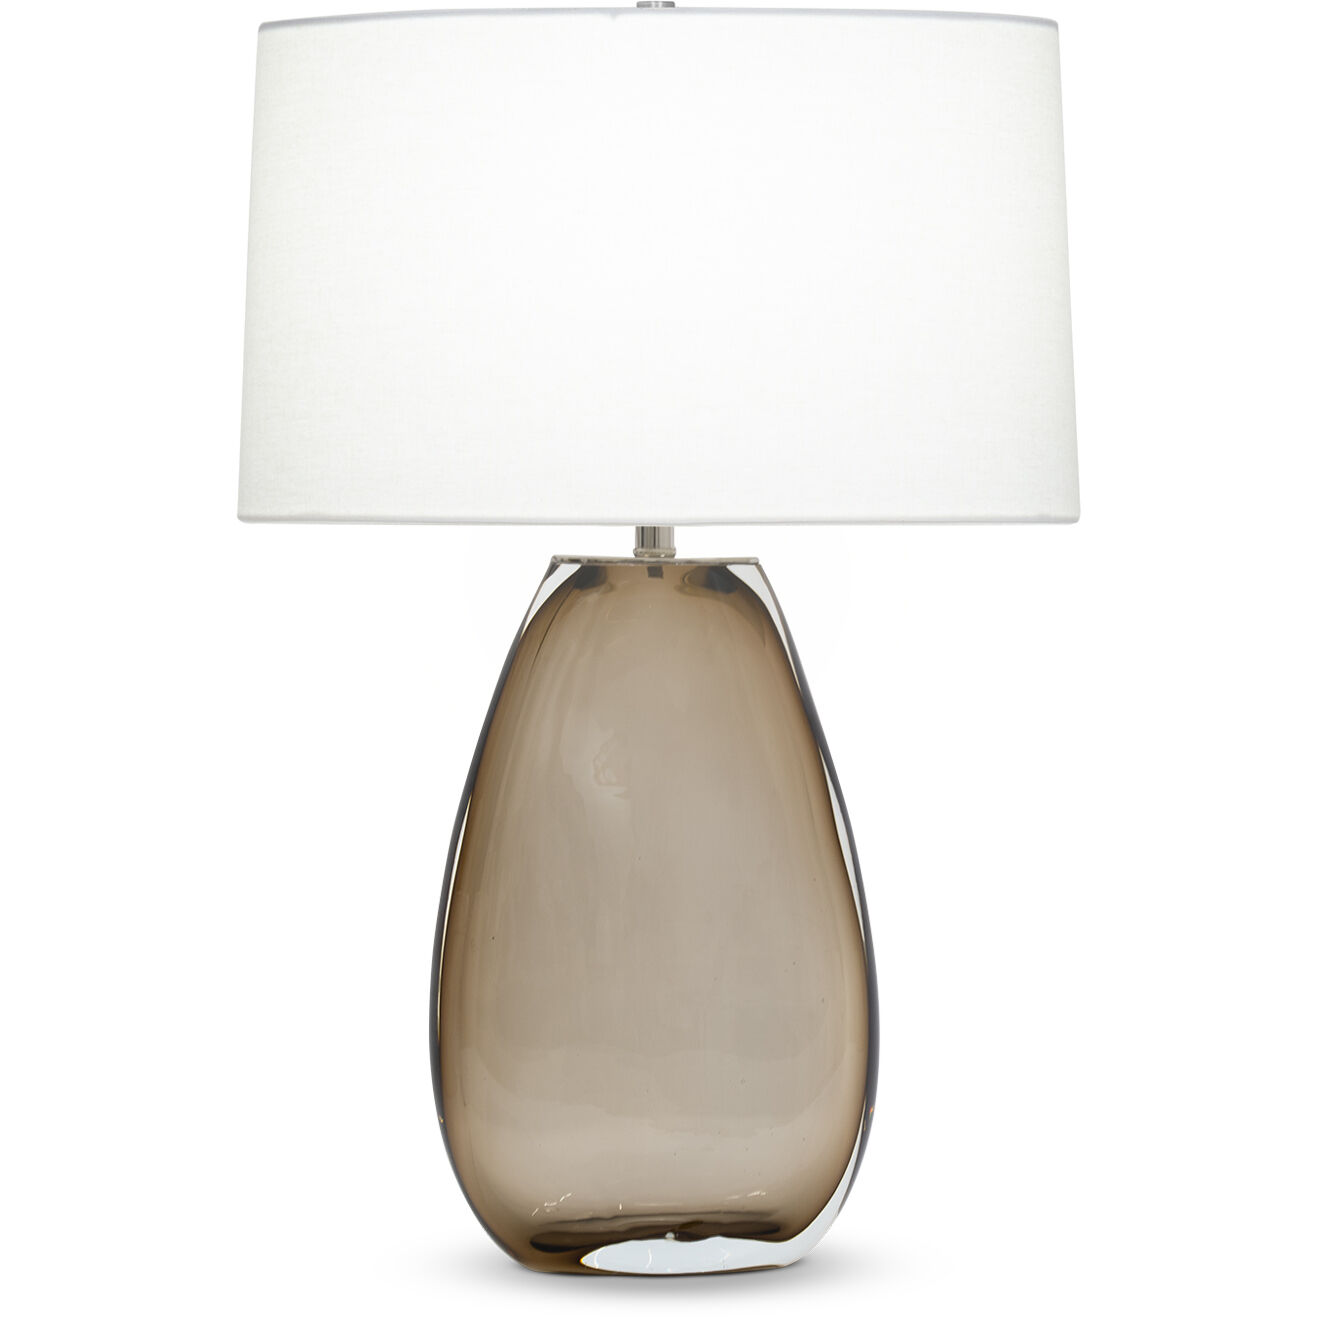 Albion Table Lamp